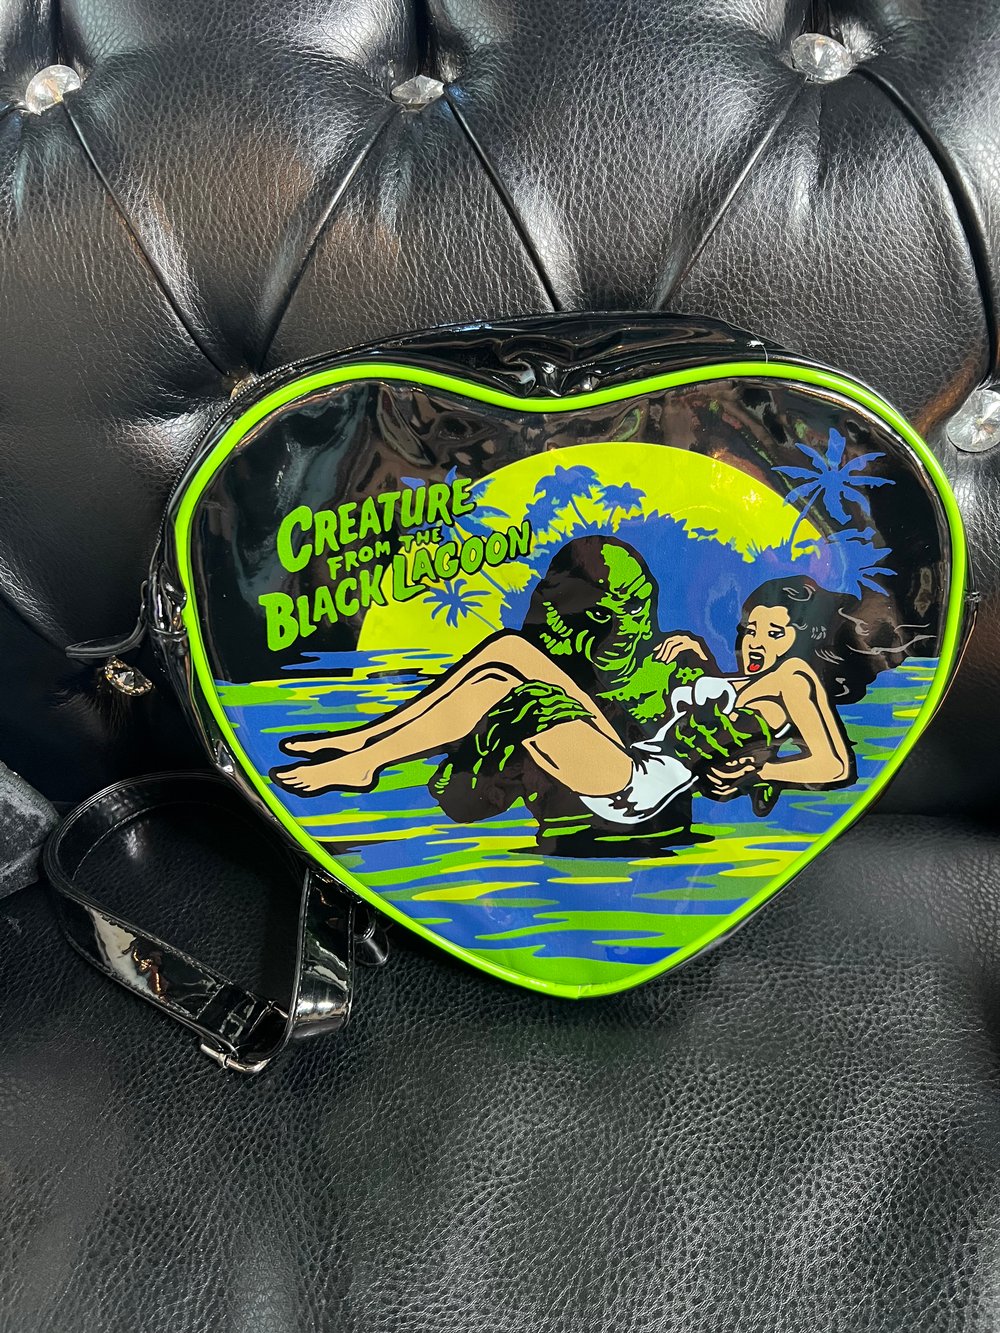 Creature from the black lagoon 🖤 purse 